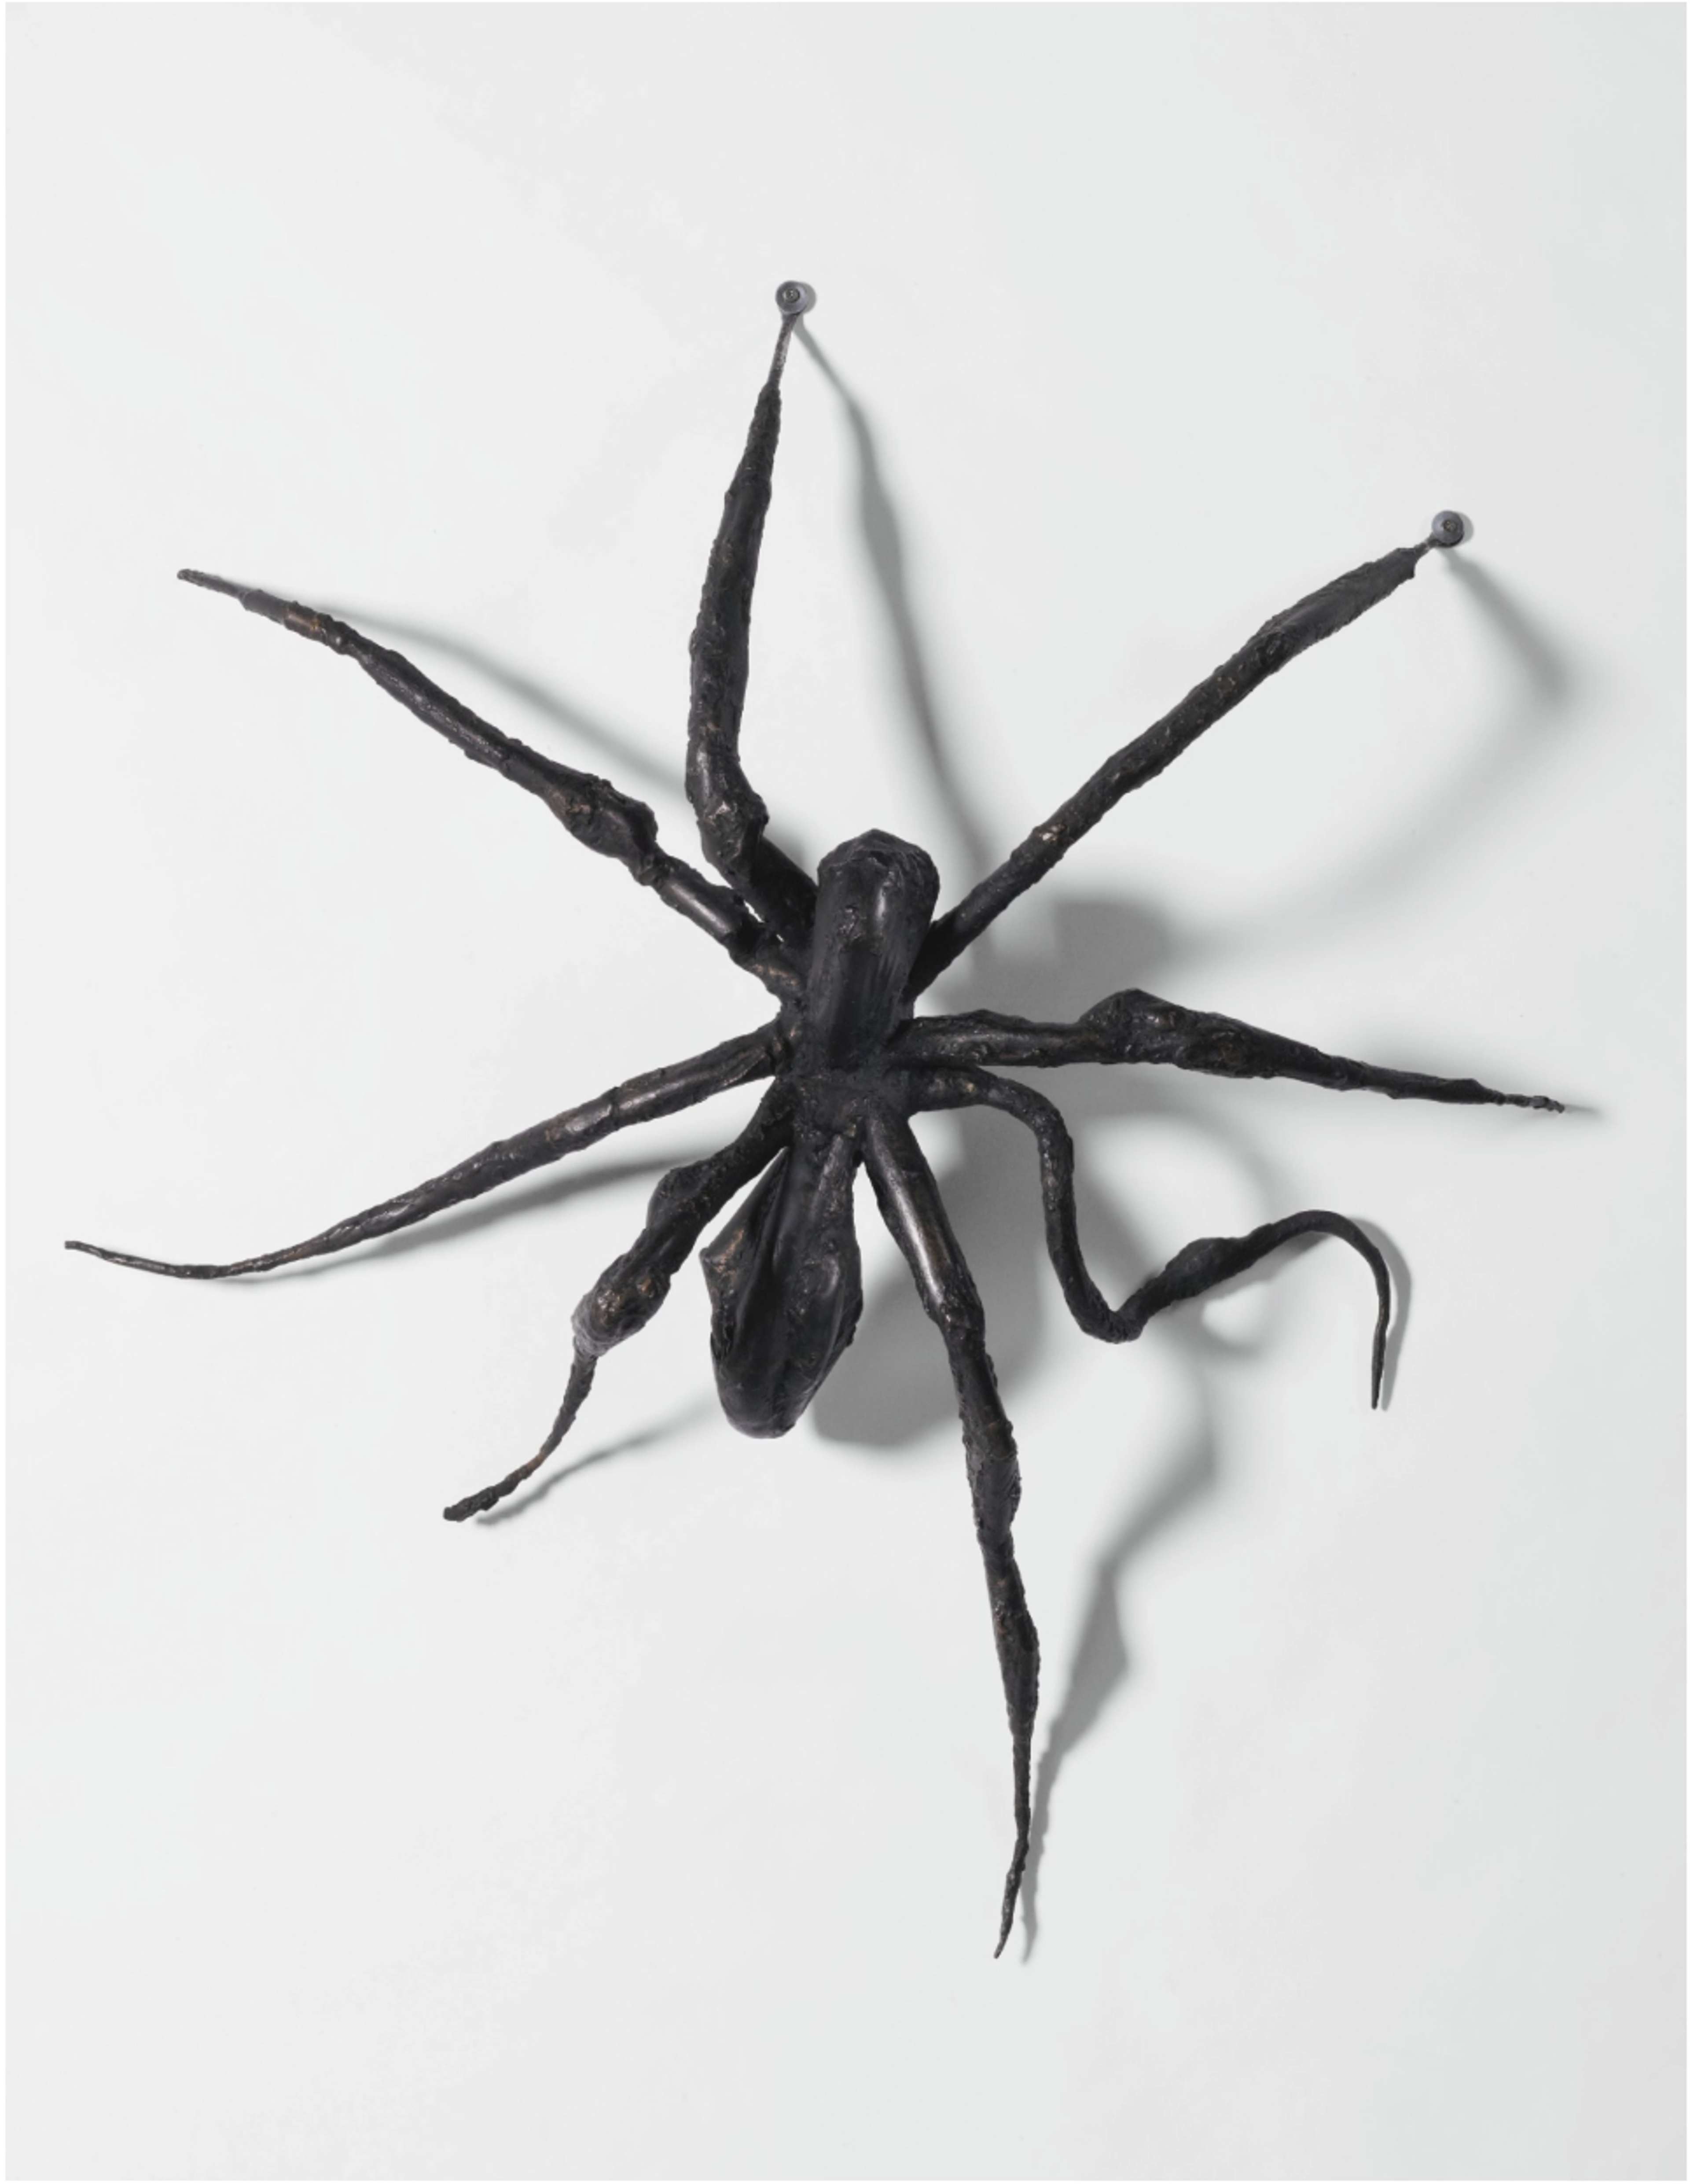 A bronze cast spider sculpture climbing up a white wall, with one leg on the left side slightly bent, creating the illusion of movement.